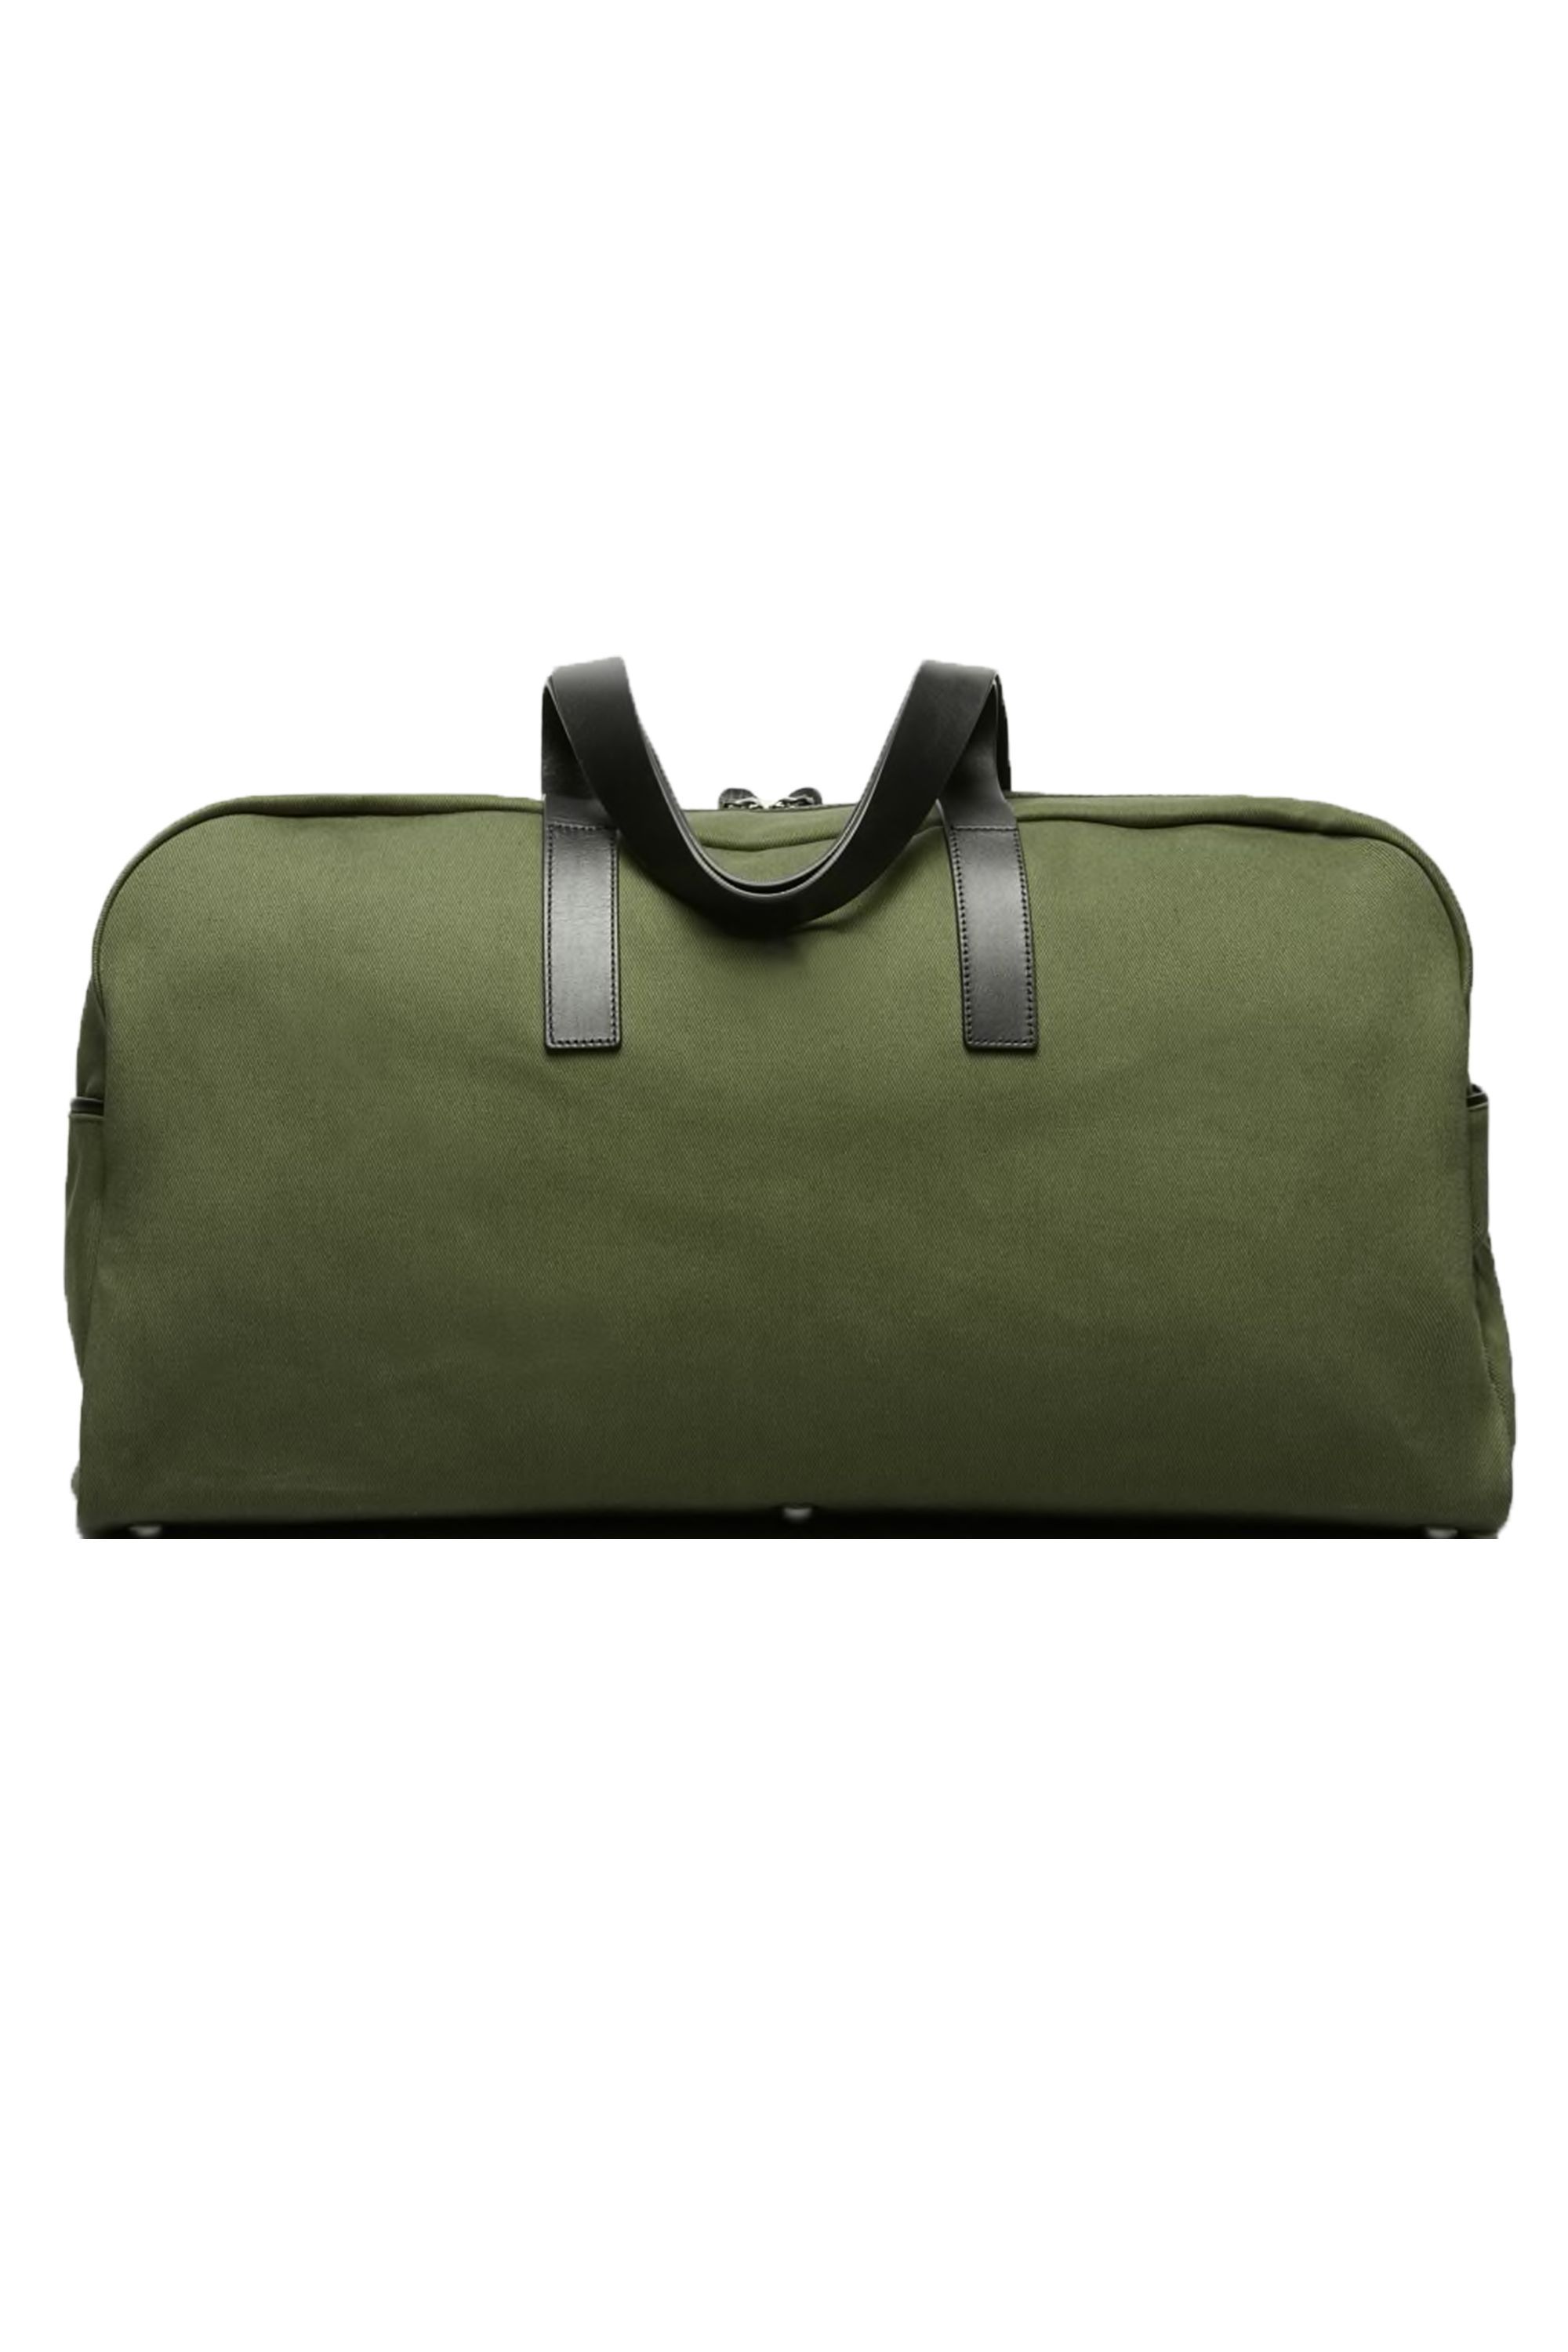 23 Best Weekender and Travel Bags for 